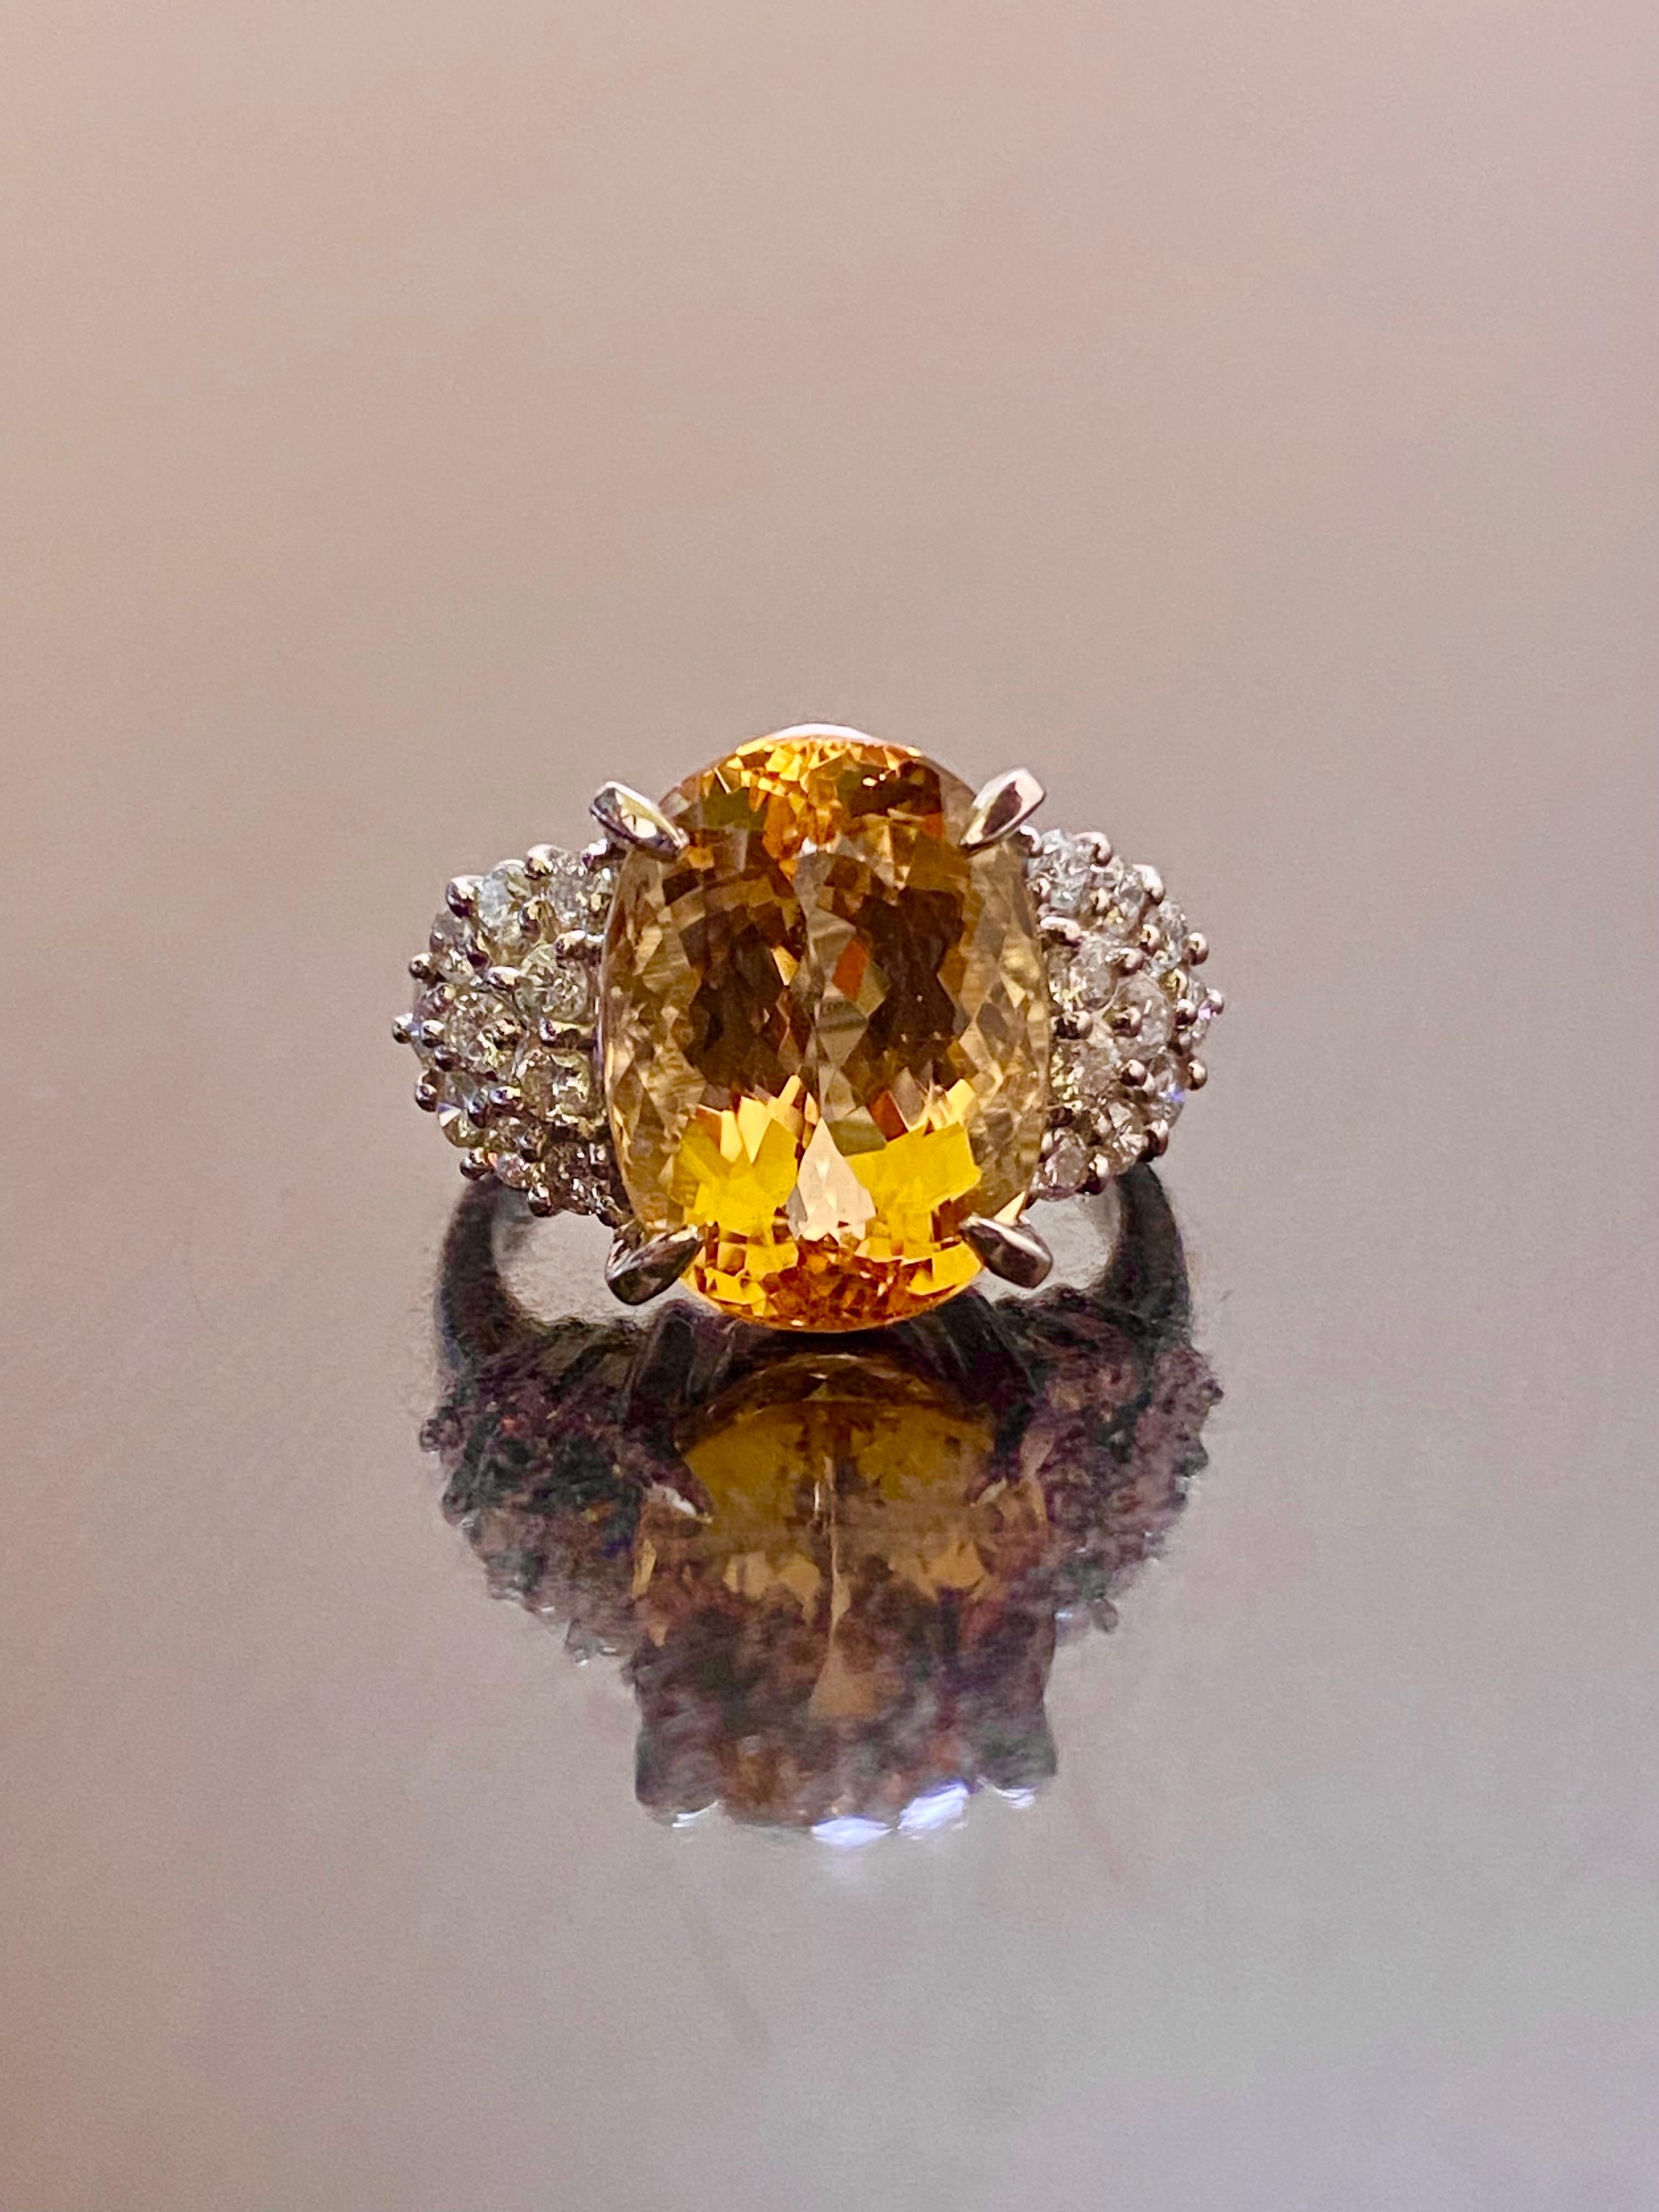 DeKara Designs Classic

Metal- 90% Platinum, 10% Iridium.

Stones- 1 Oval Imperial Topaz 8.88 Carats, 20 Round Diamonds G-H Color VS2-SI1 Clarity 0.72 Carats.

Size- 6. FREE SIZING!!!!

Ring is currently getting certified by GIA.

One of a Kind